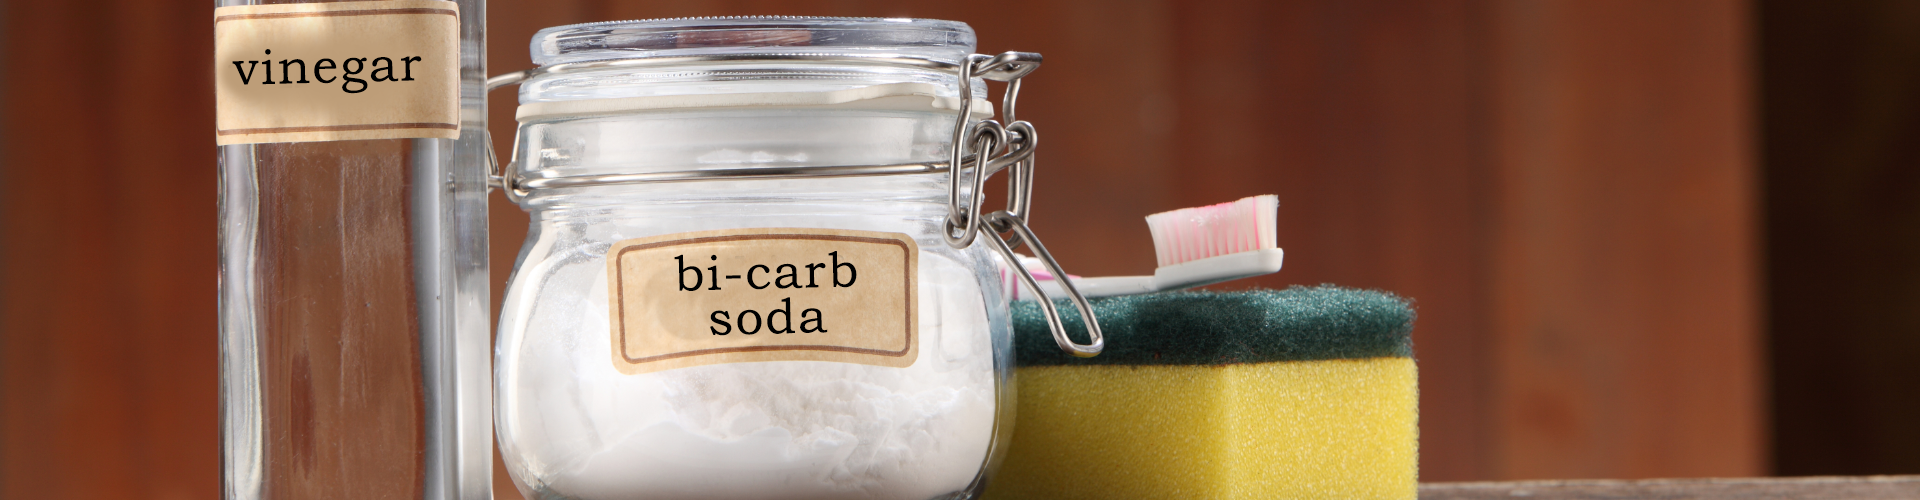 5 Magnificent Ways to Clean with Bi-Carb Soda Around Your Home